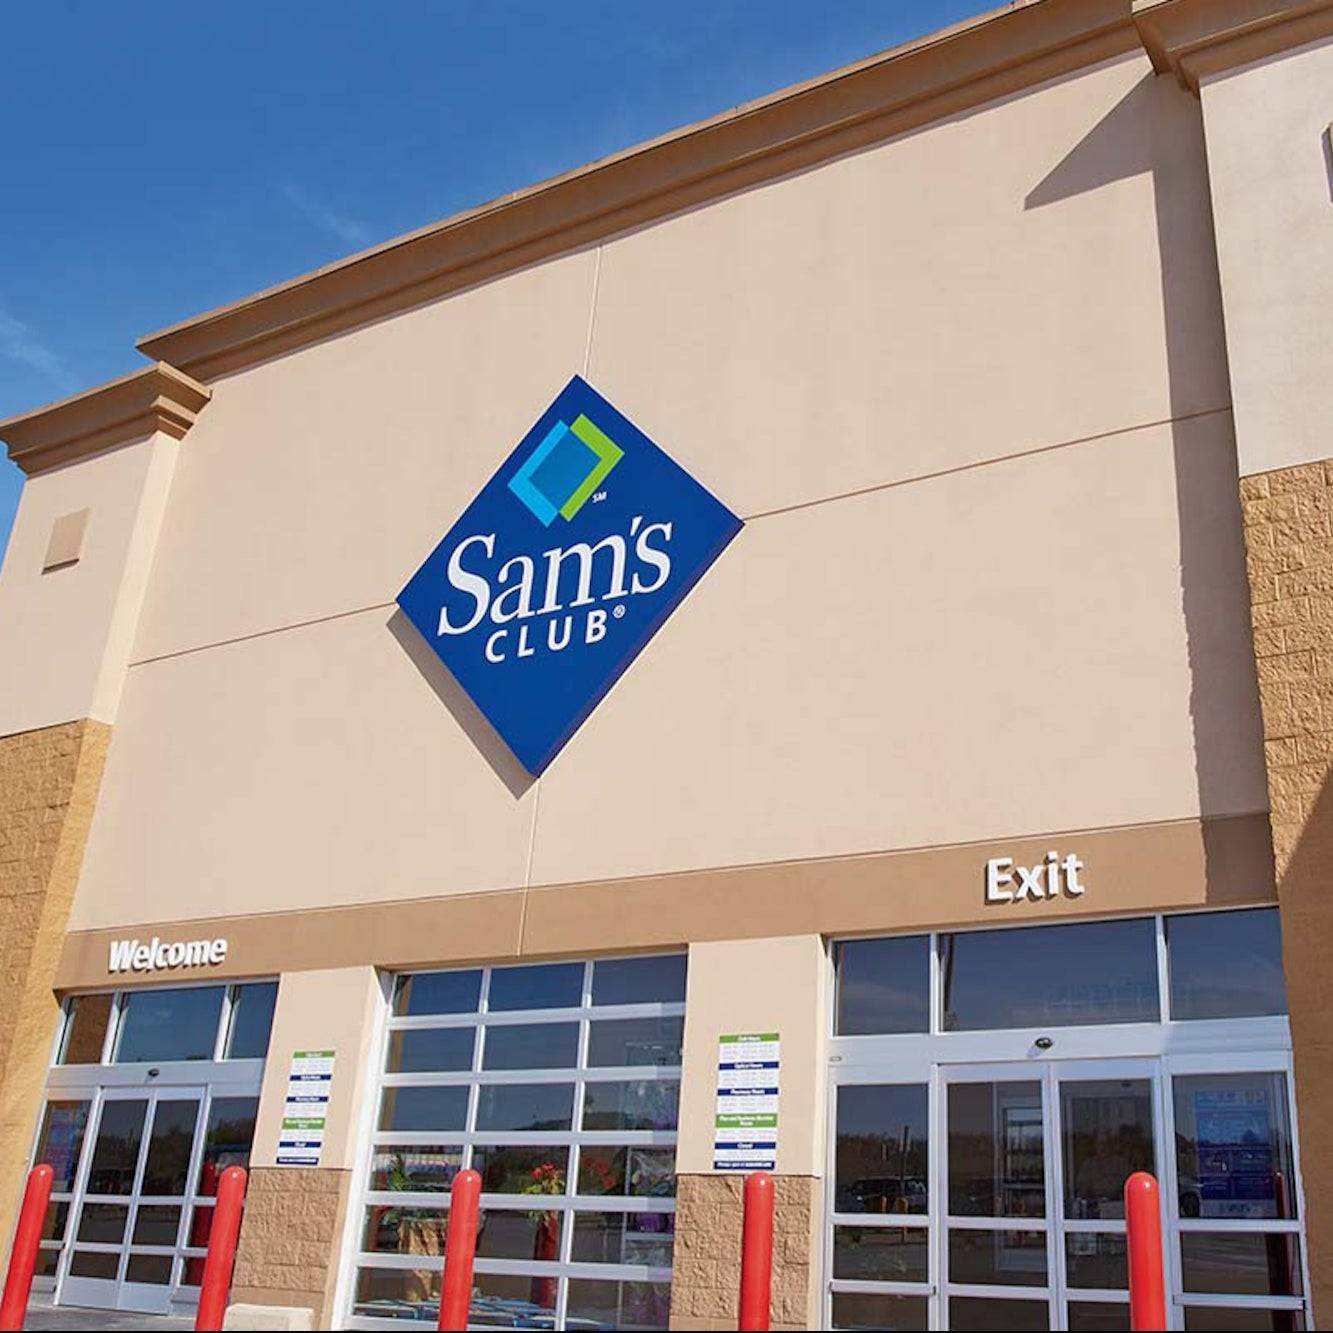 Best items to buy at Sam's club